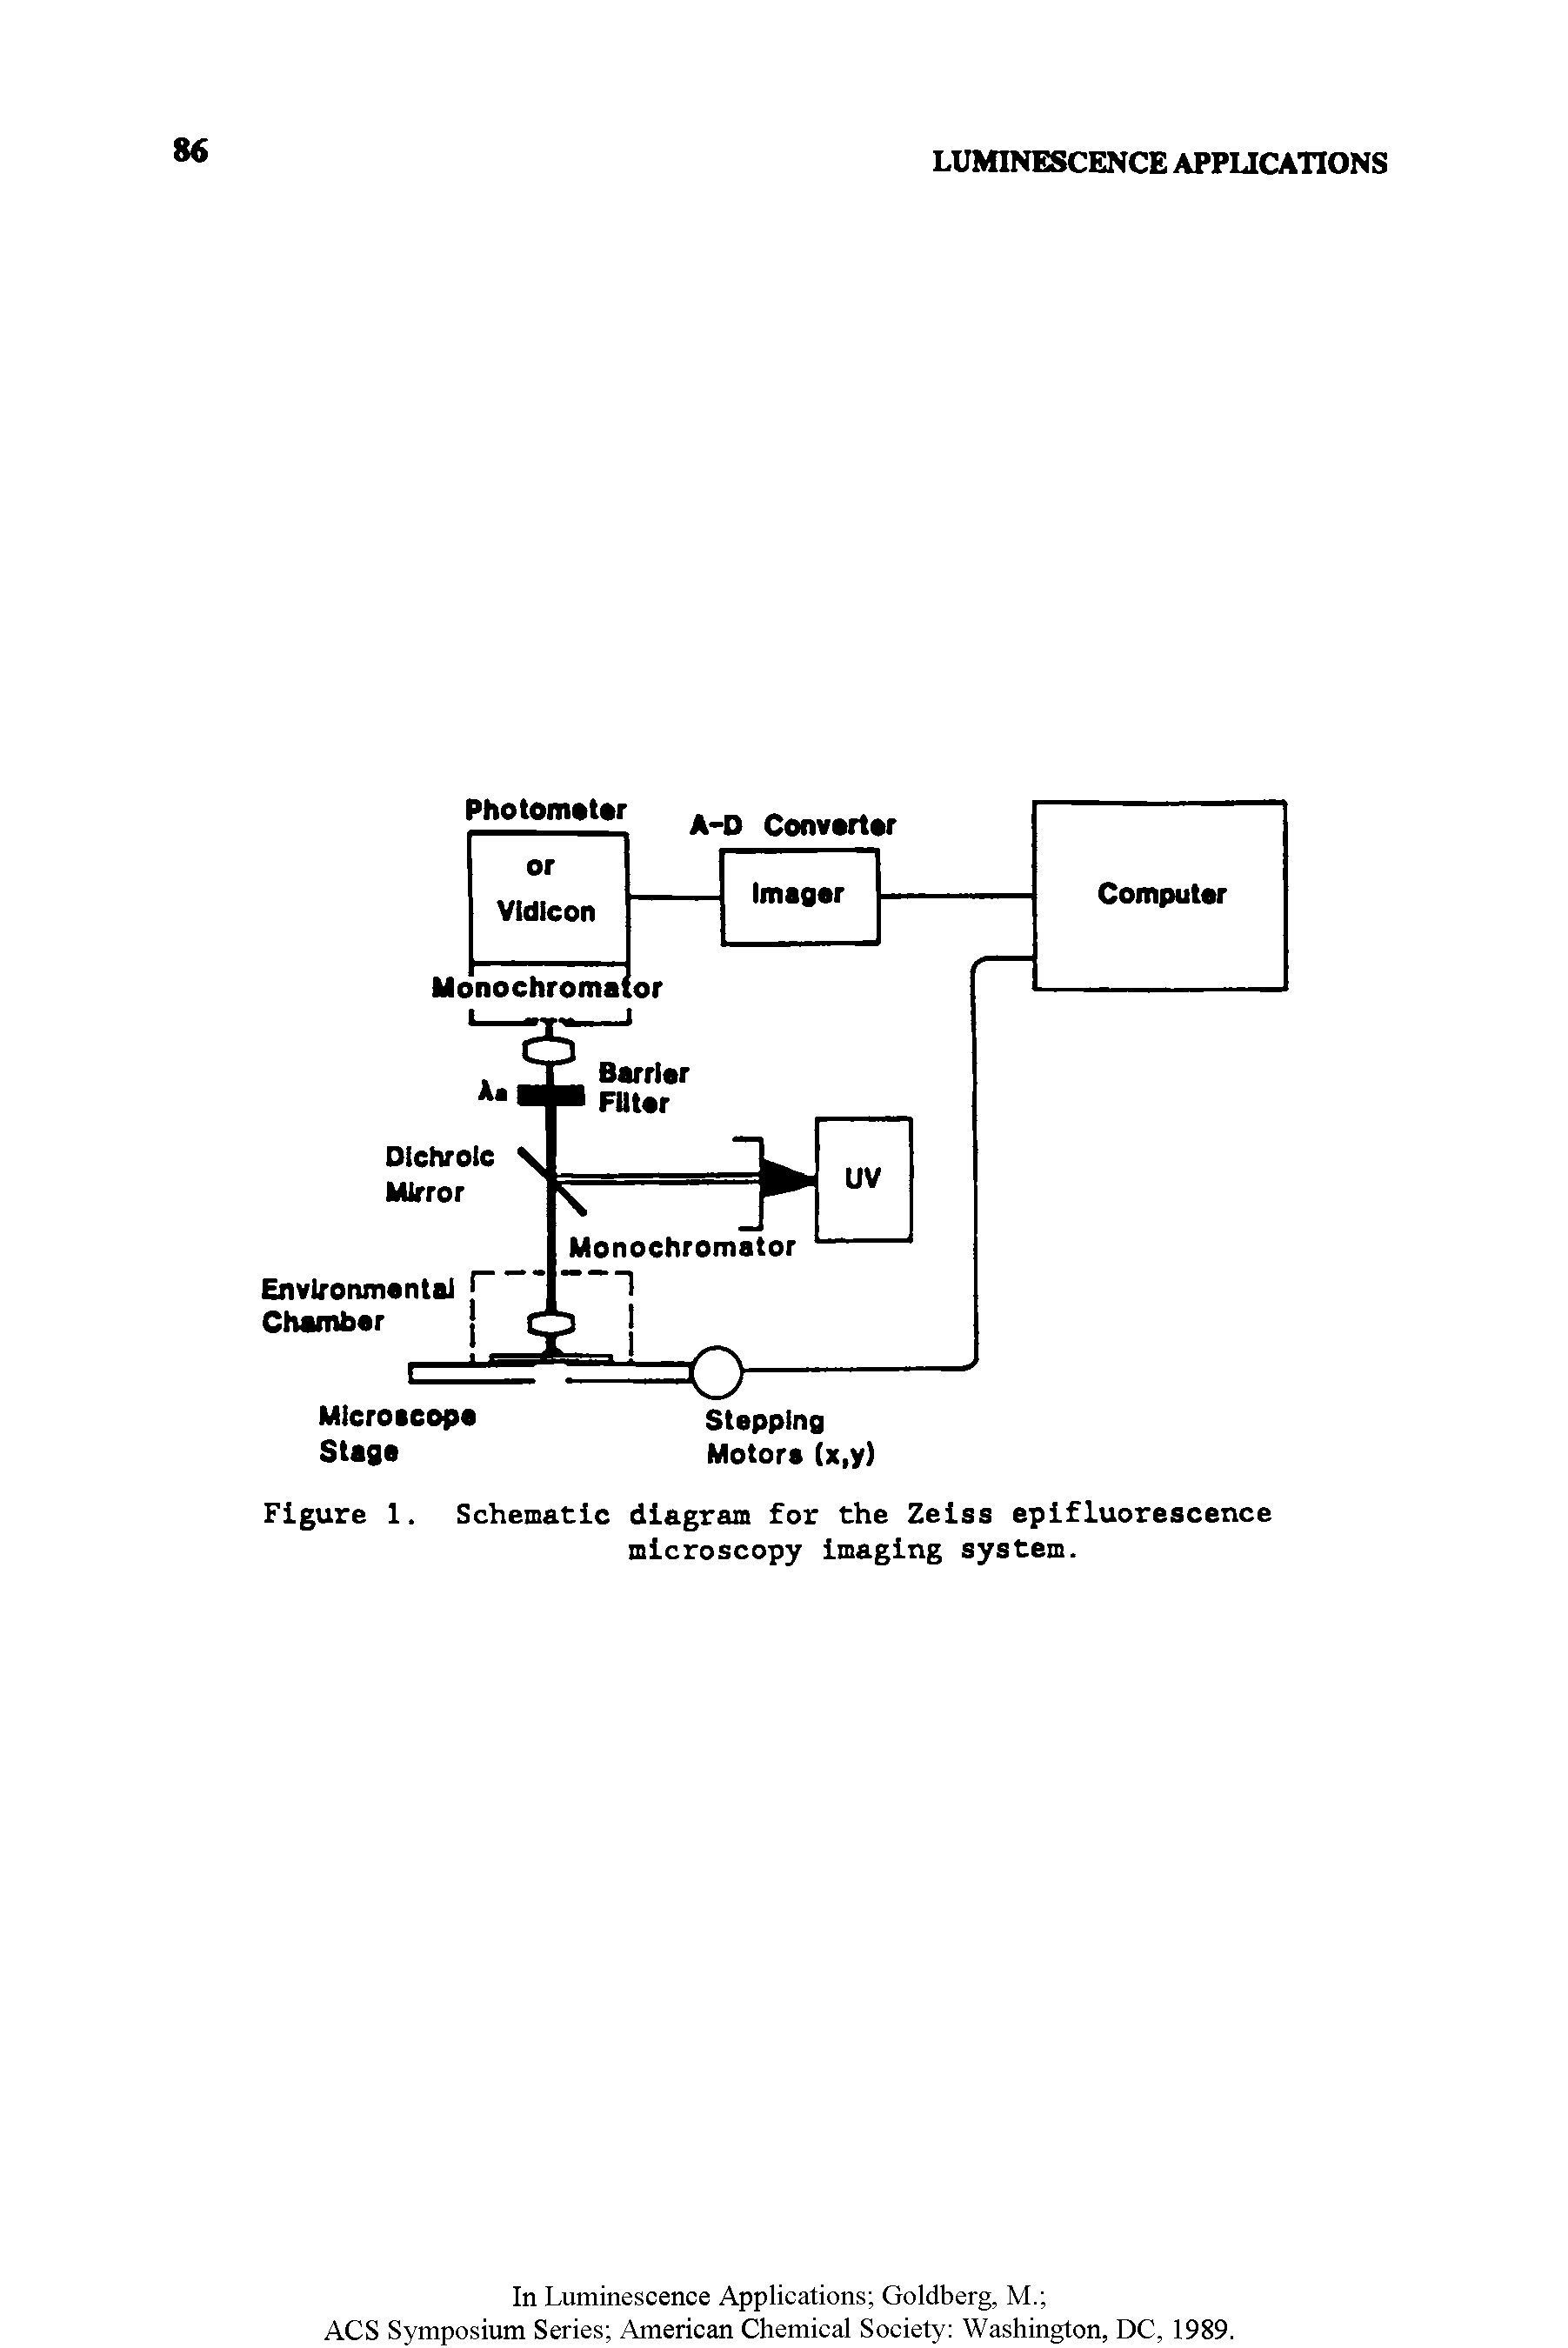 Figure 1. Schematic diagram for the Zeiss eplfluorescence microscopy Imaging system.